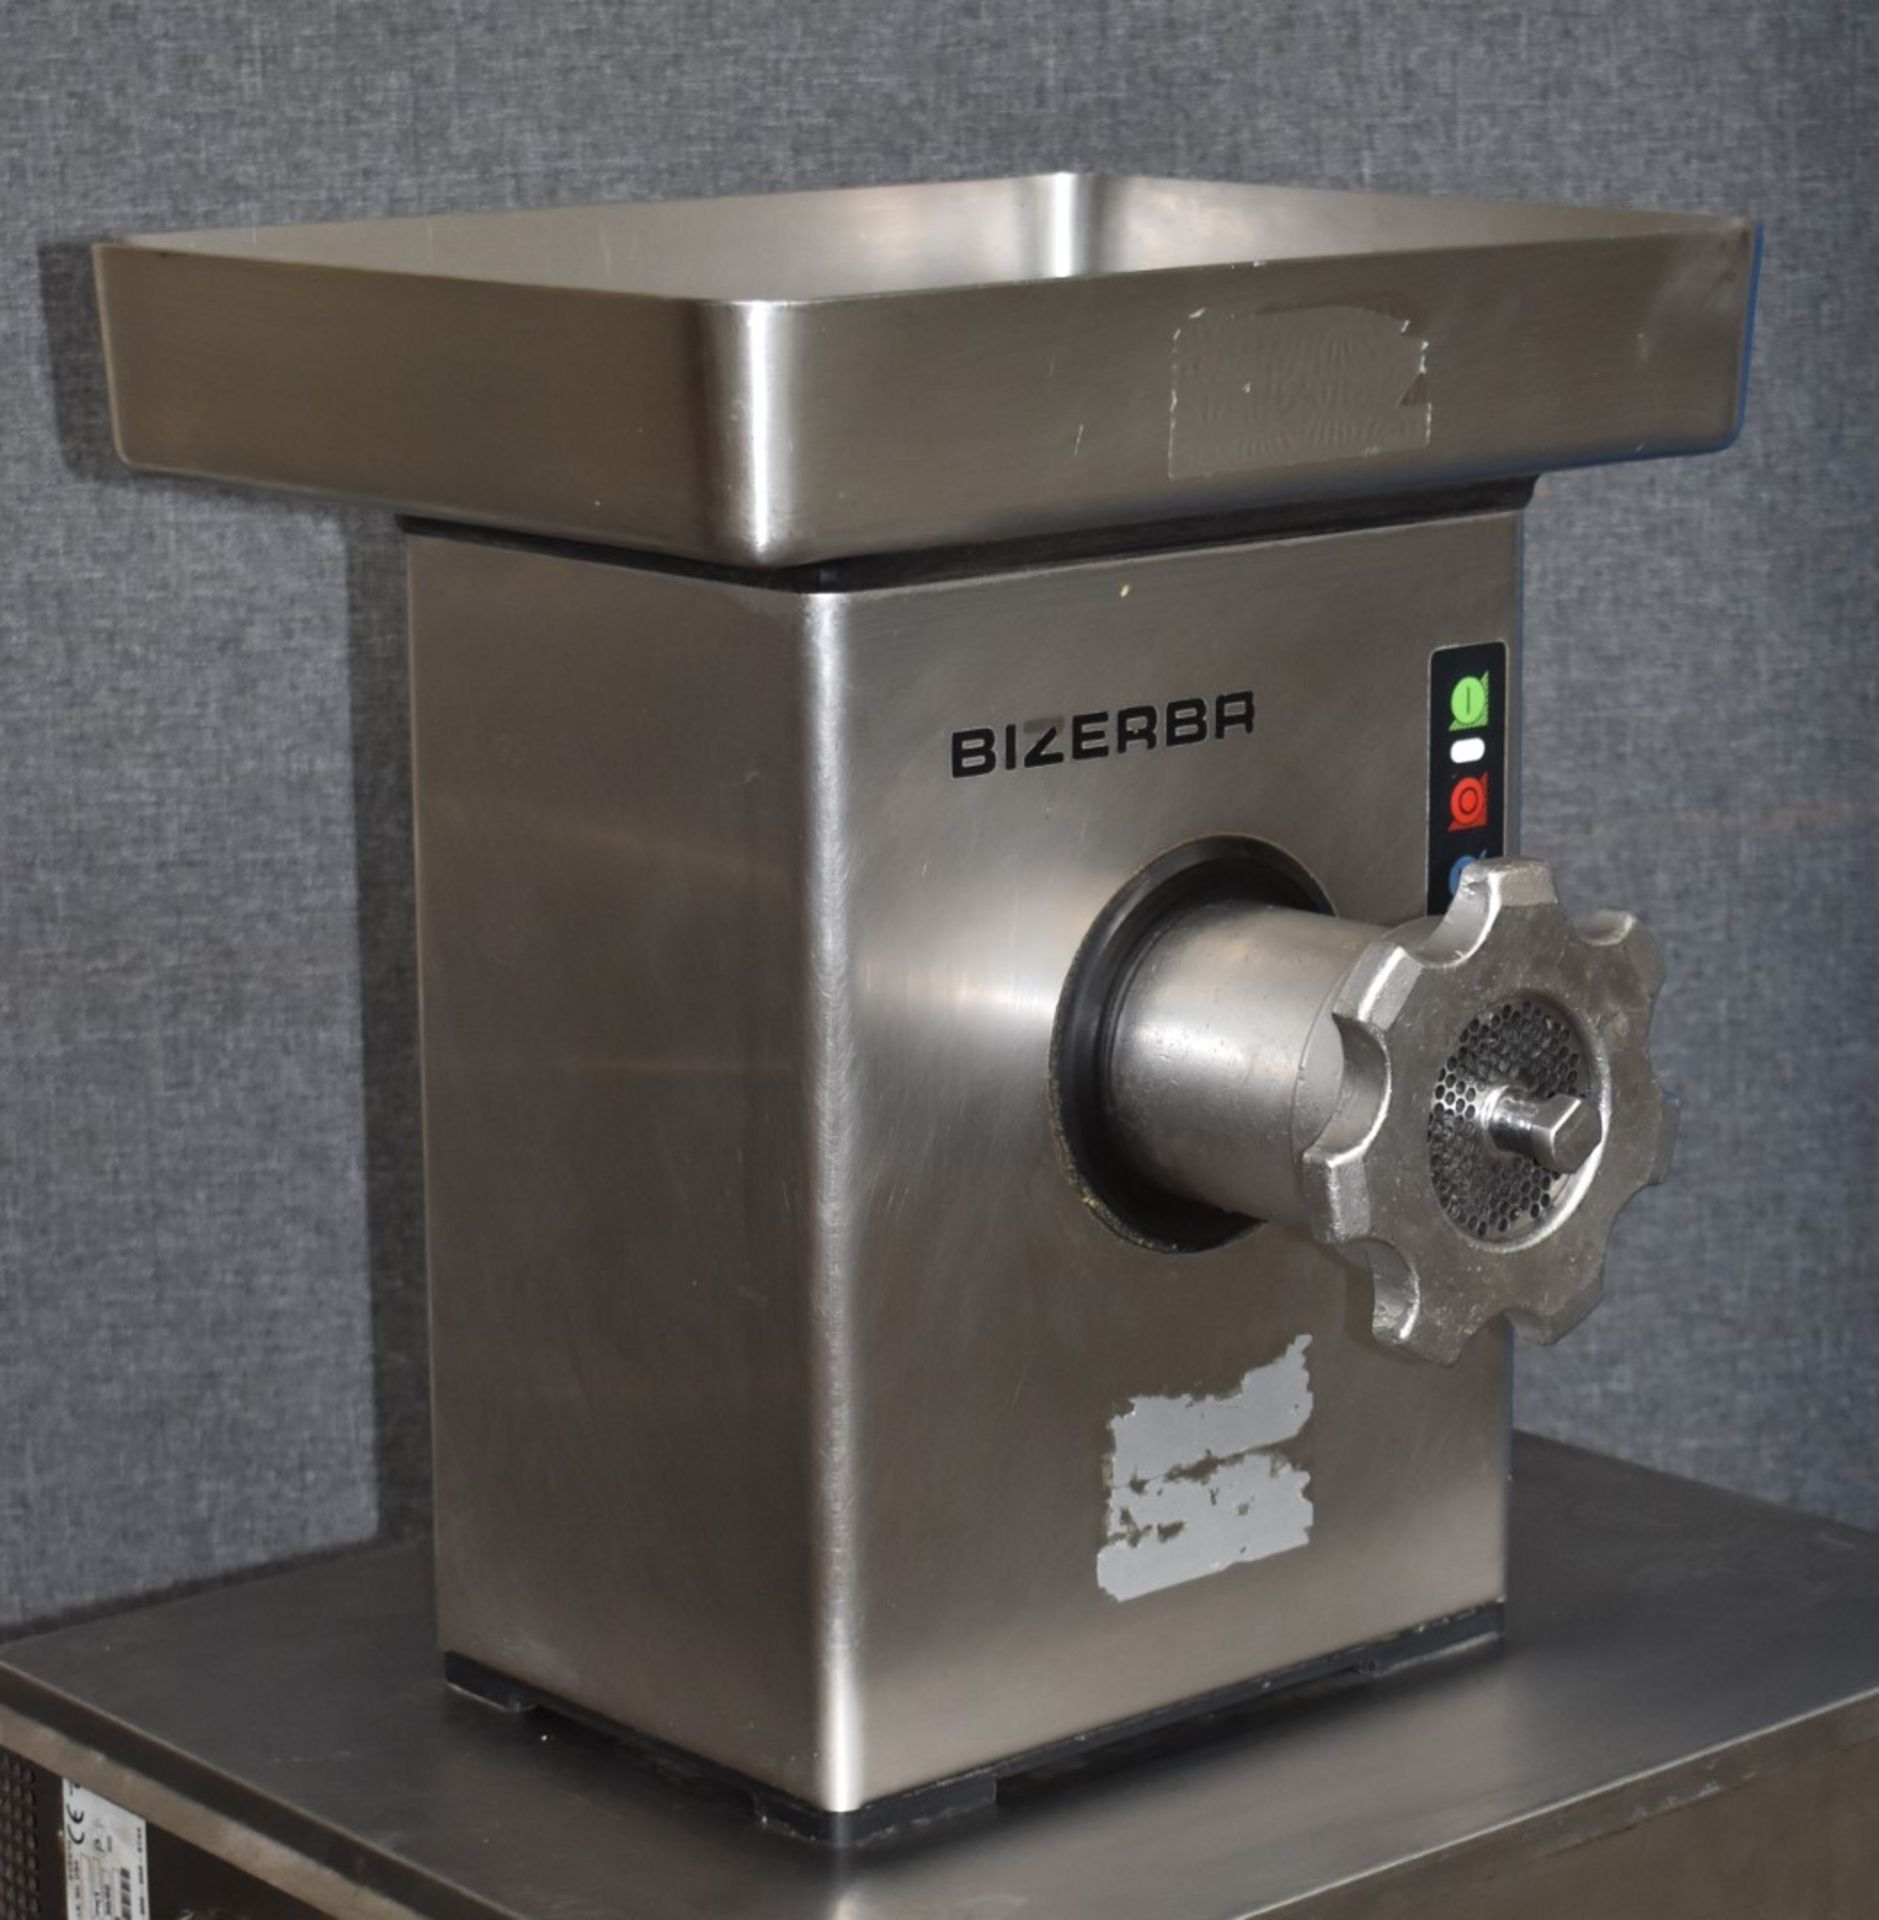 1 x Bizerba Meat Mincer - Stainless Steel Construction - Model FW-N 22/2 - 240v UK Plug - Recently - Image 11 of 12